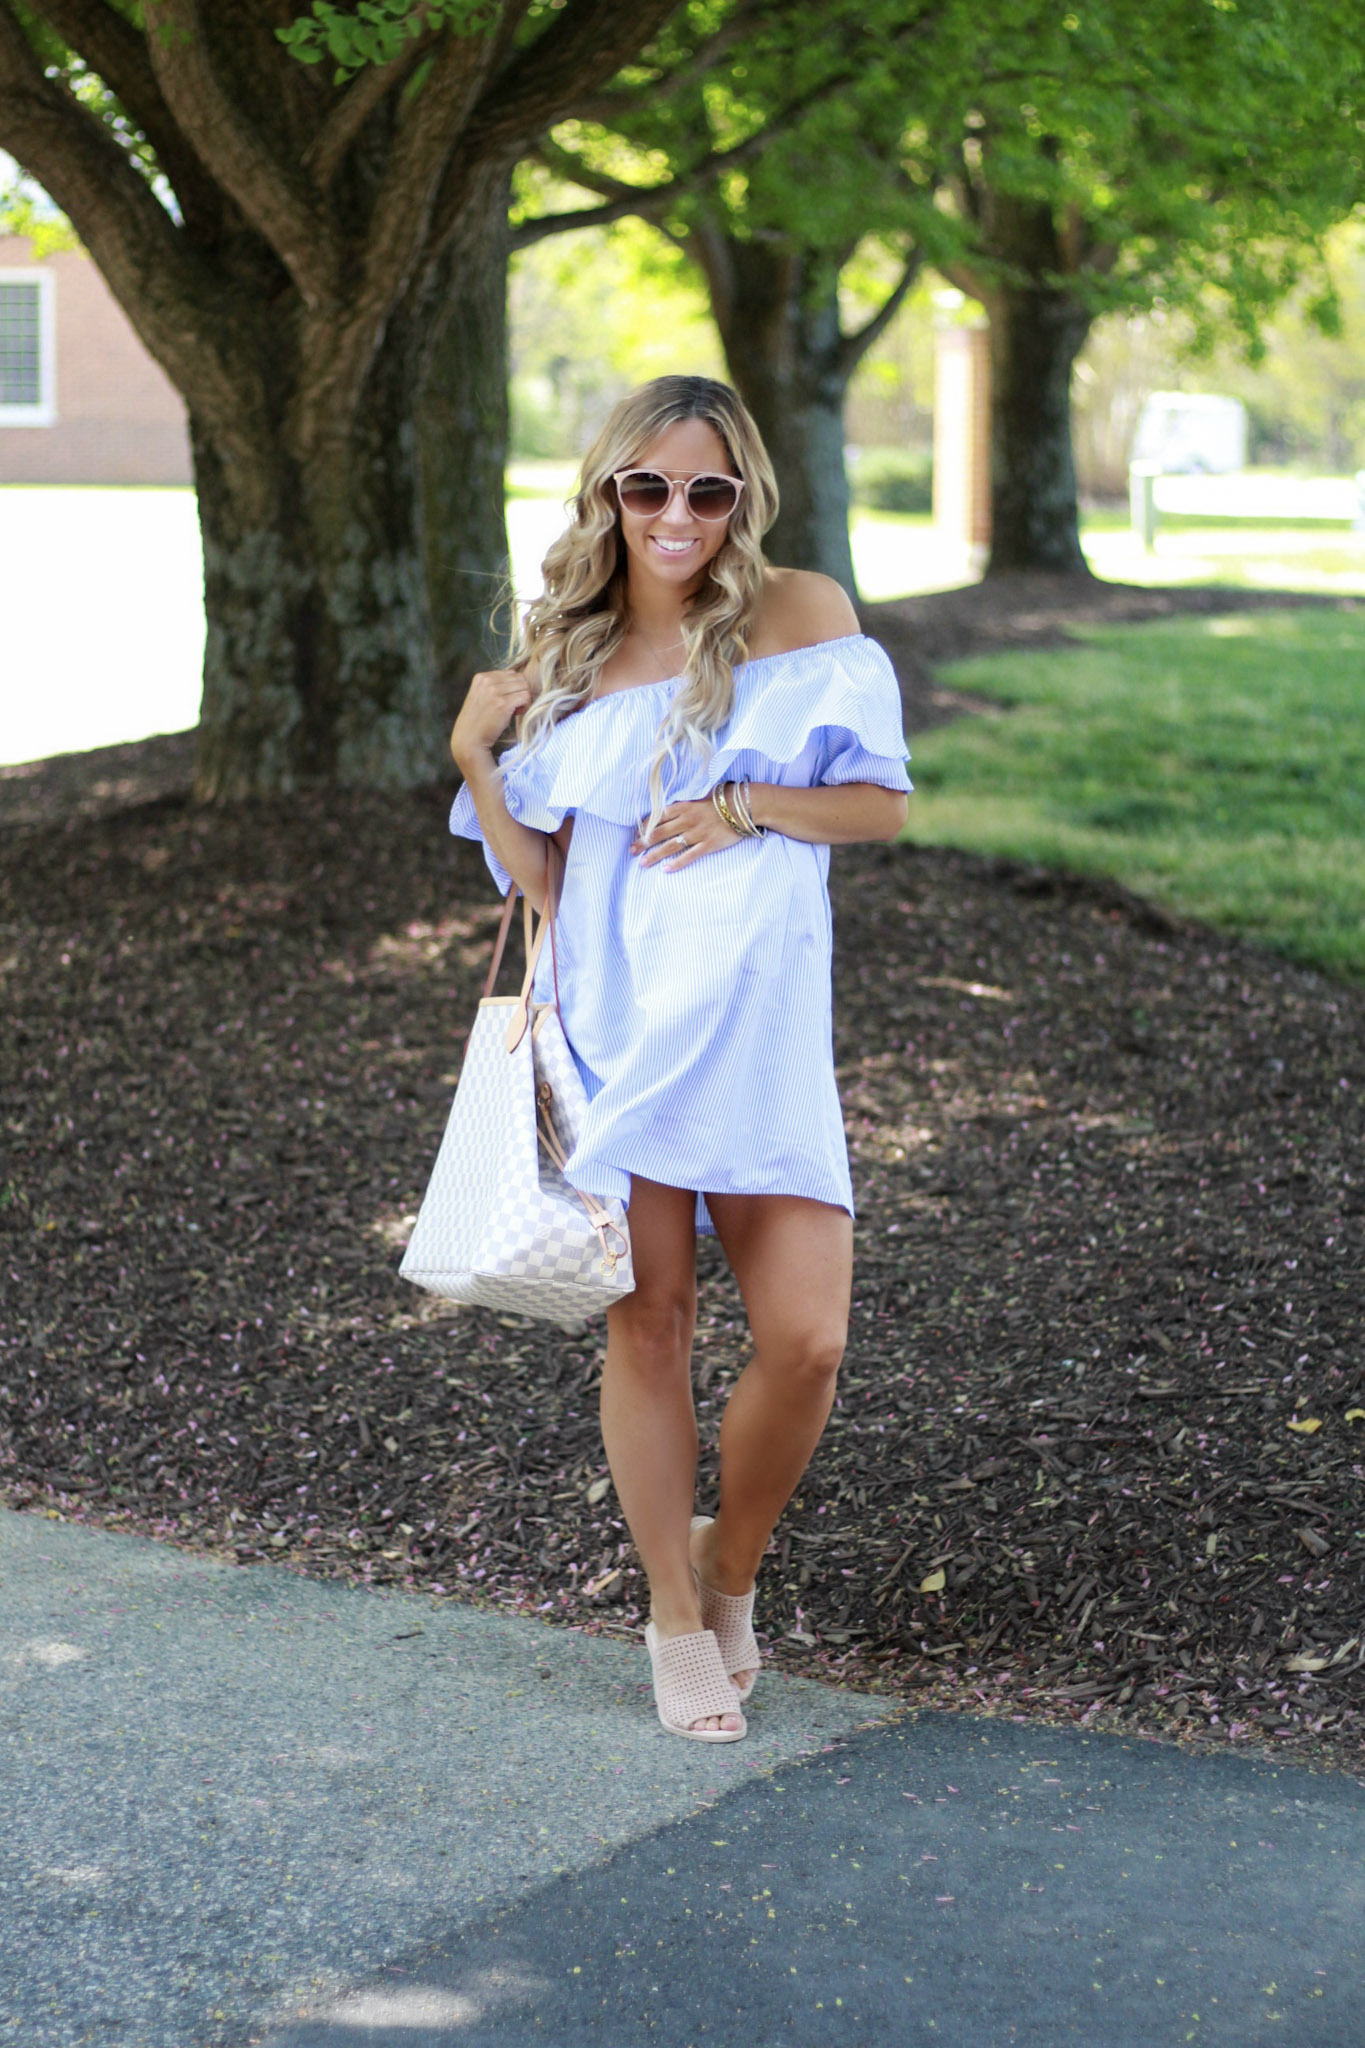 Blue Ruffle Dress & Comfiest Wedges for Spring - According to Blaire